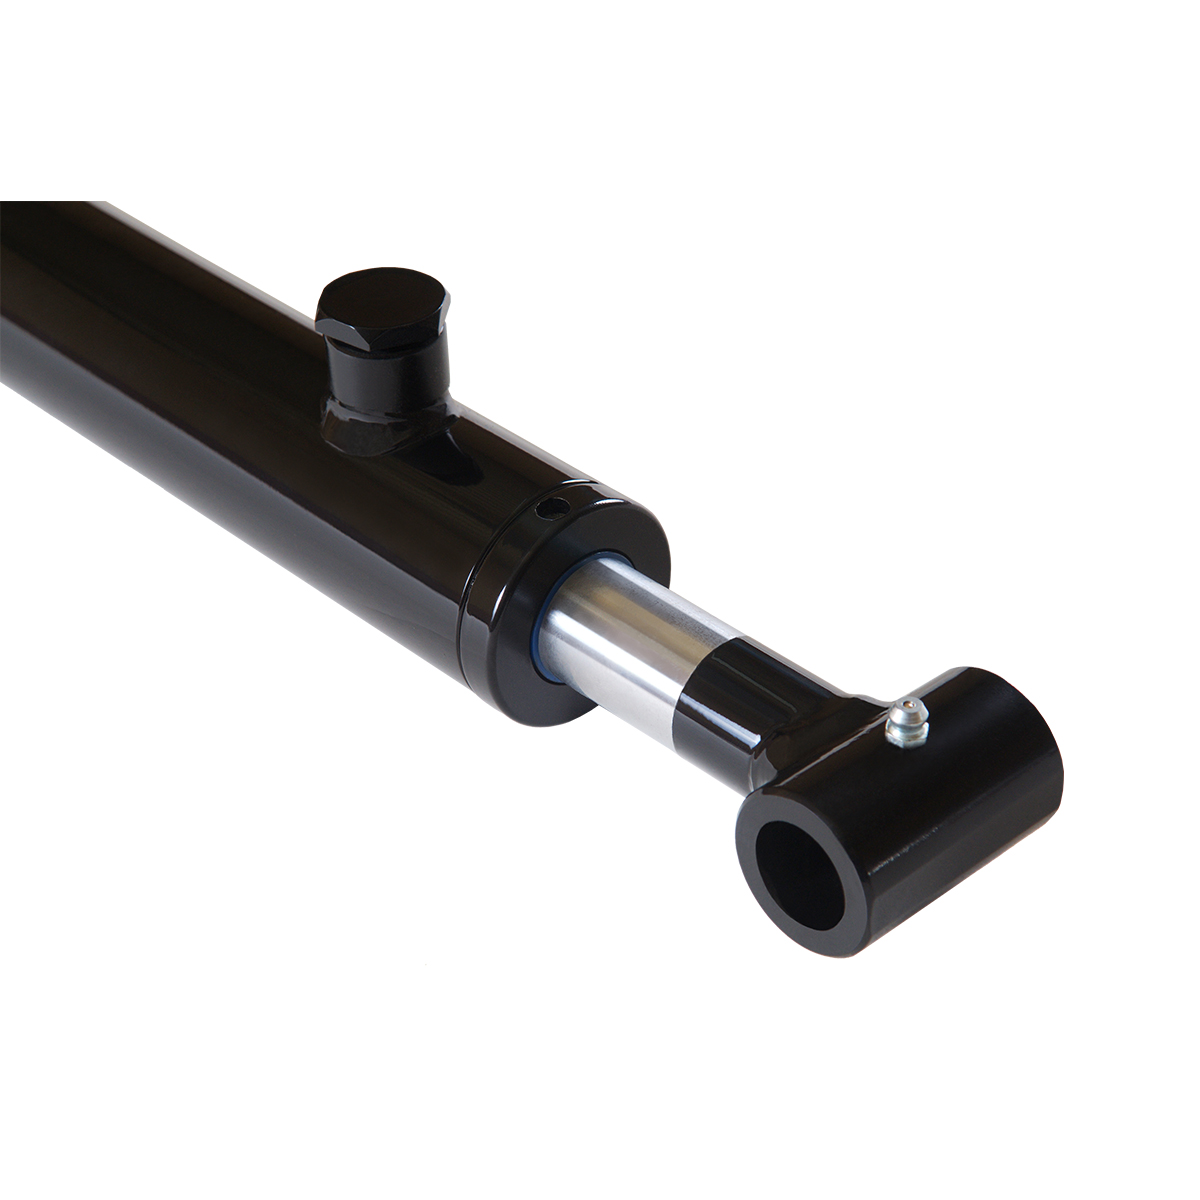 1.5 bore x 6 stroke hydraulic cylinder, welded cross tube double acting cylinder | Magister Hydraulics